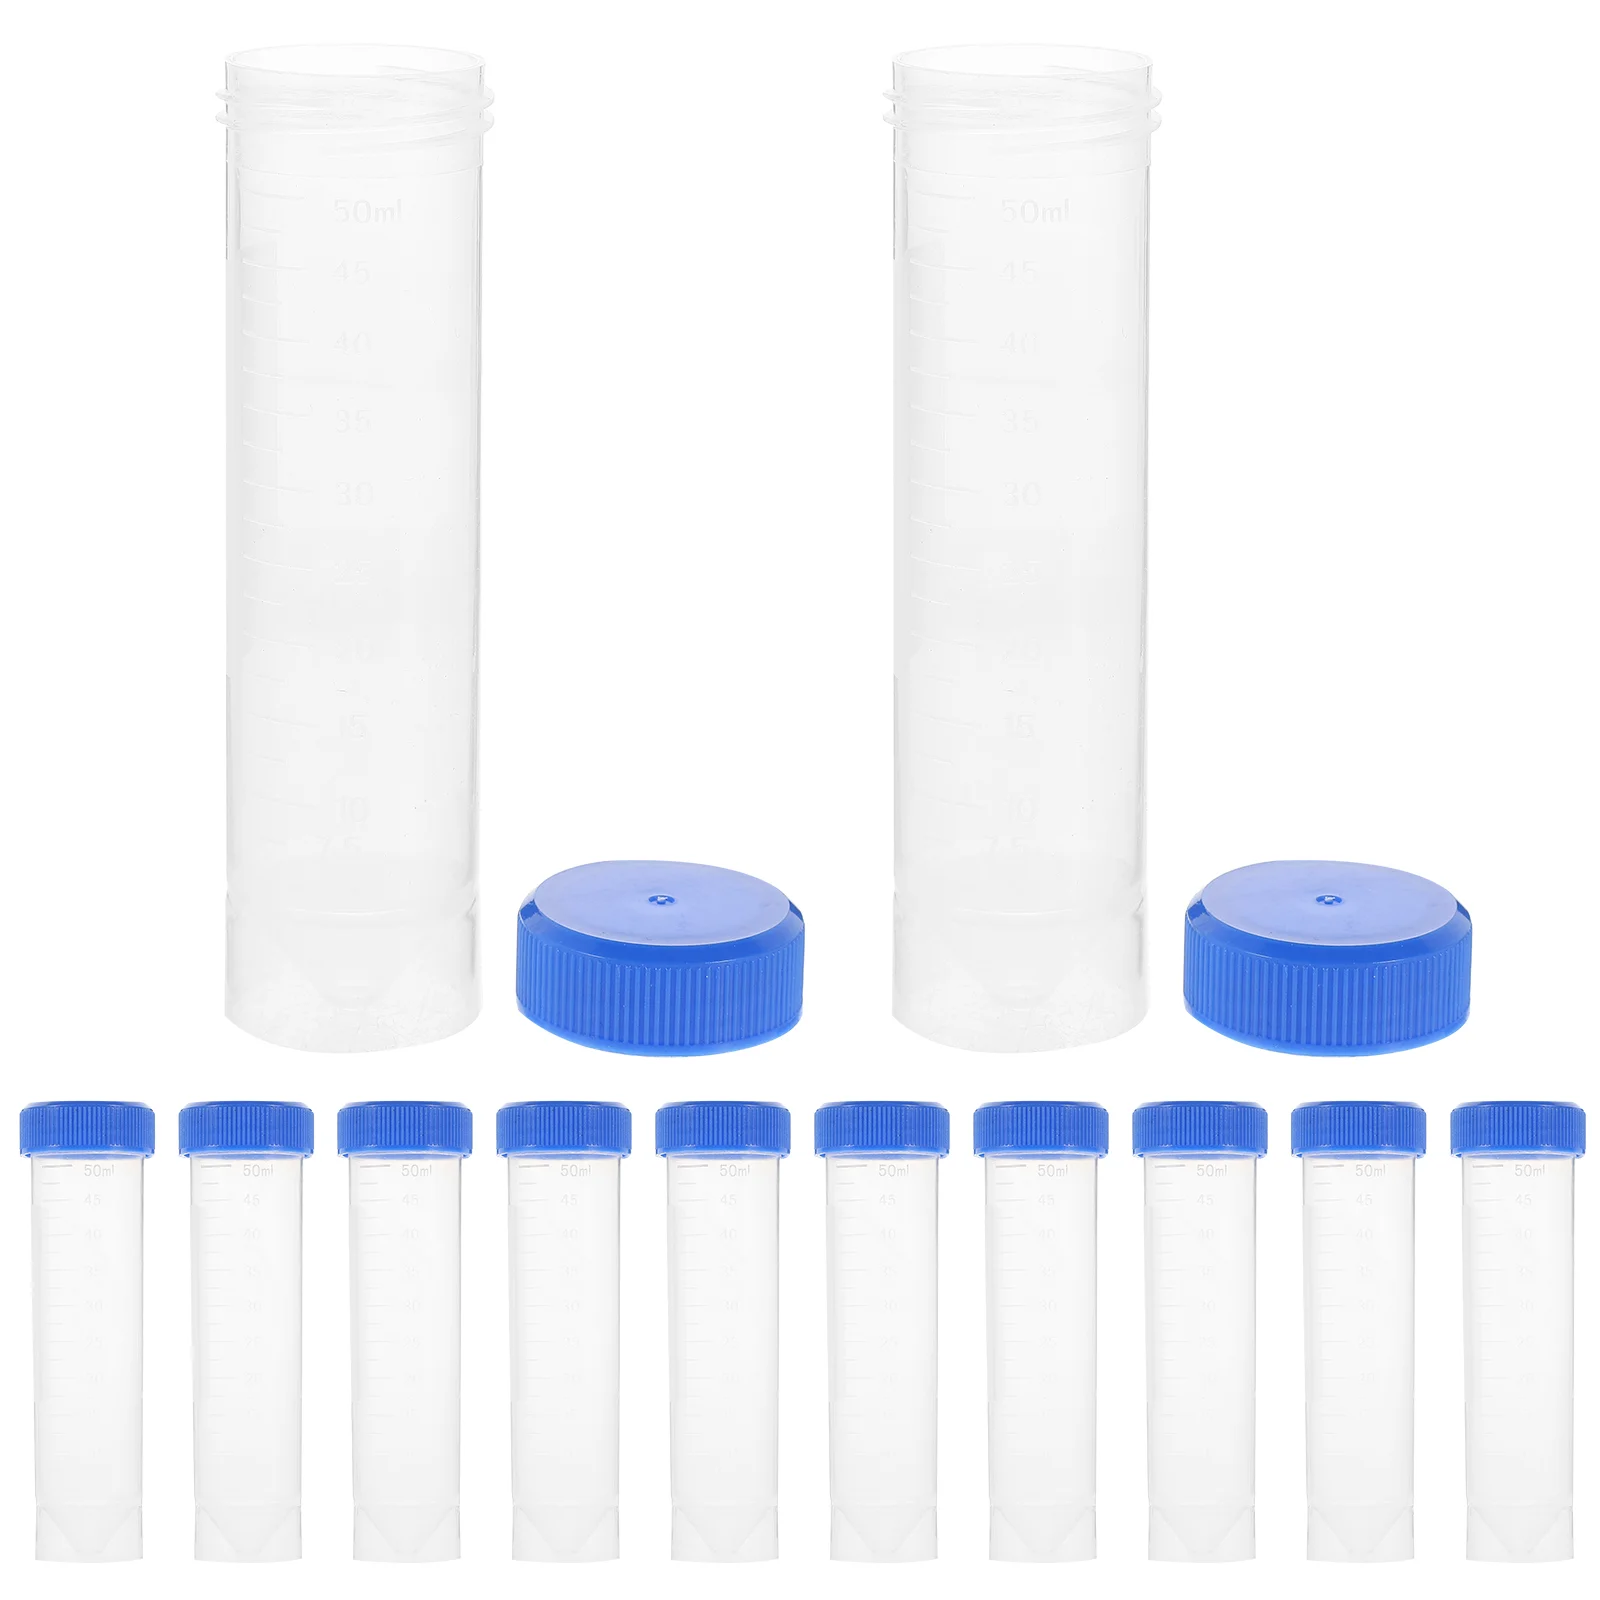 

50 Pcs Plastic Containers Experiment Test Tube Sample Centrifuge Tubes Laboratory Screw Caps Pp Centrifugal Vials Small